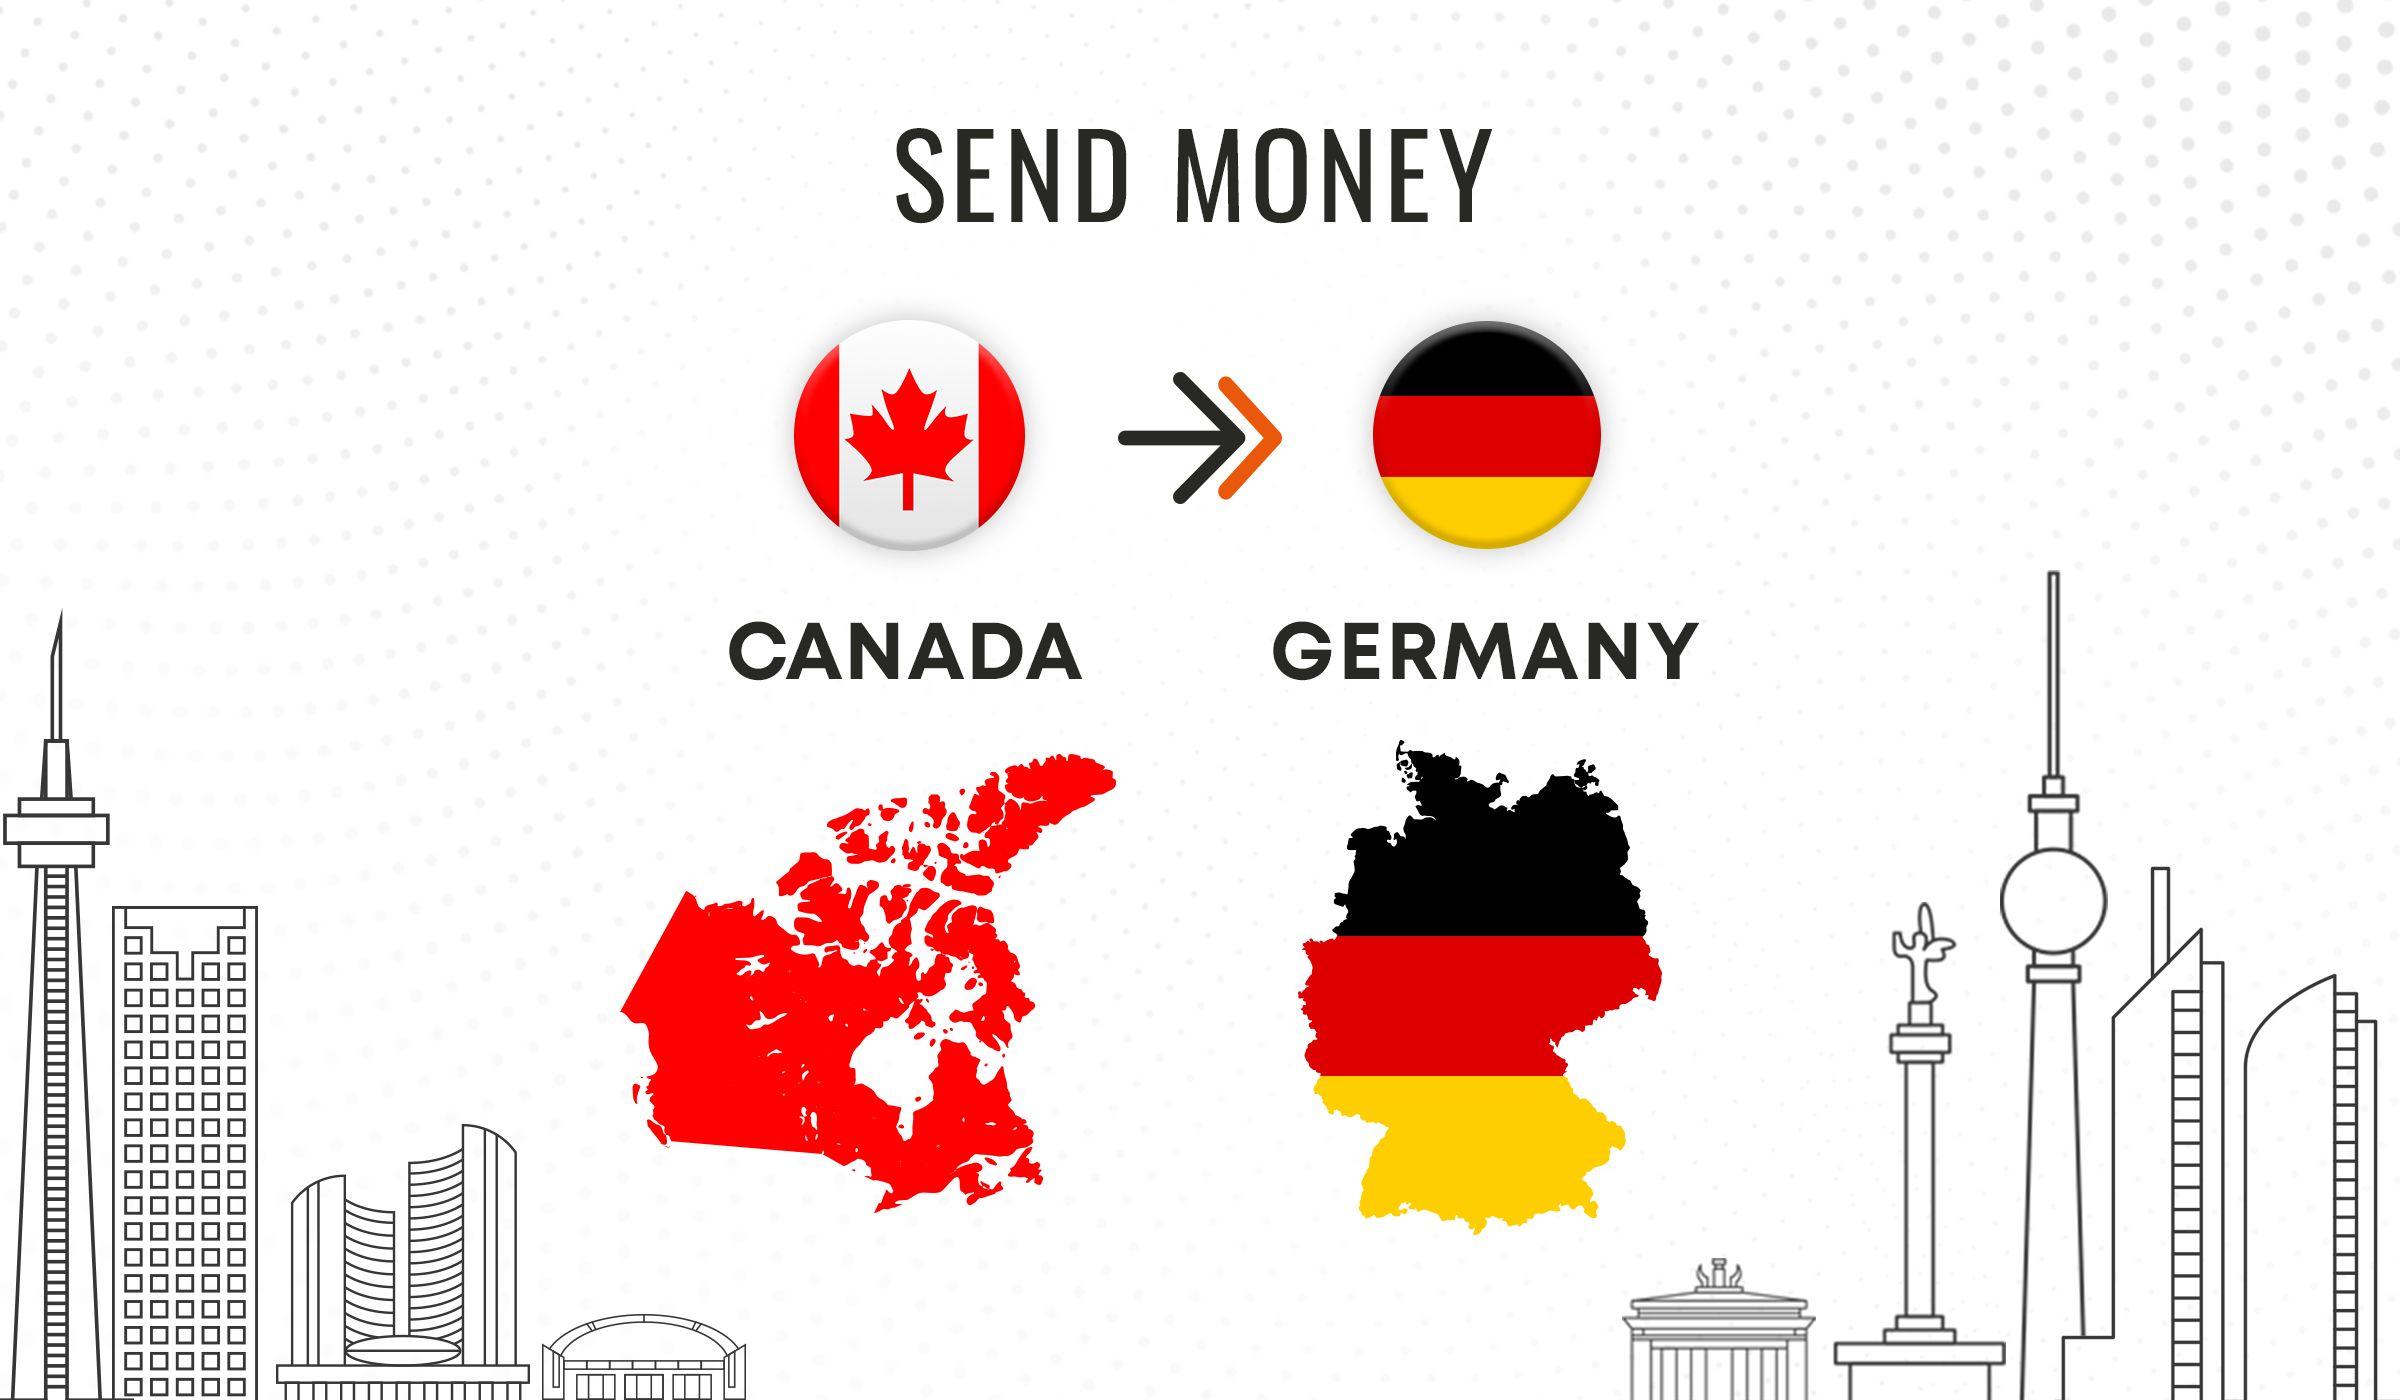 How to Send Money to Germany from Canada?